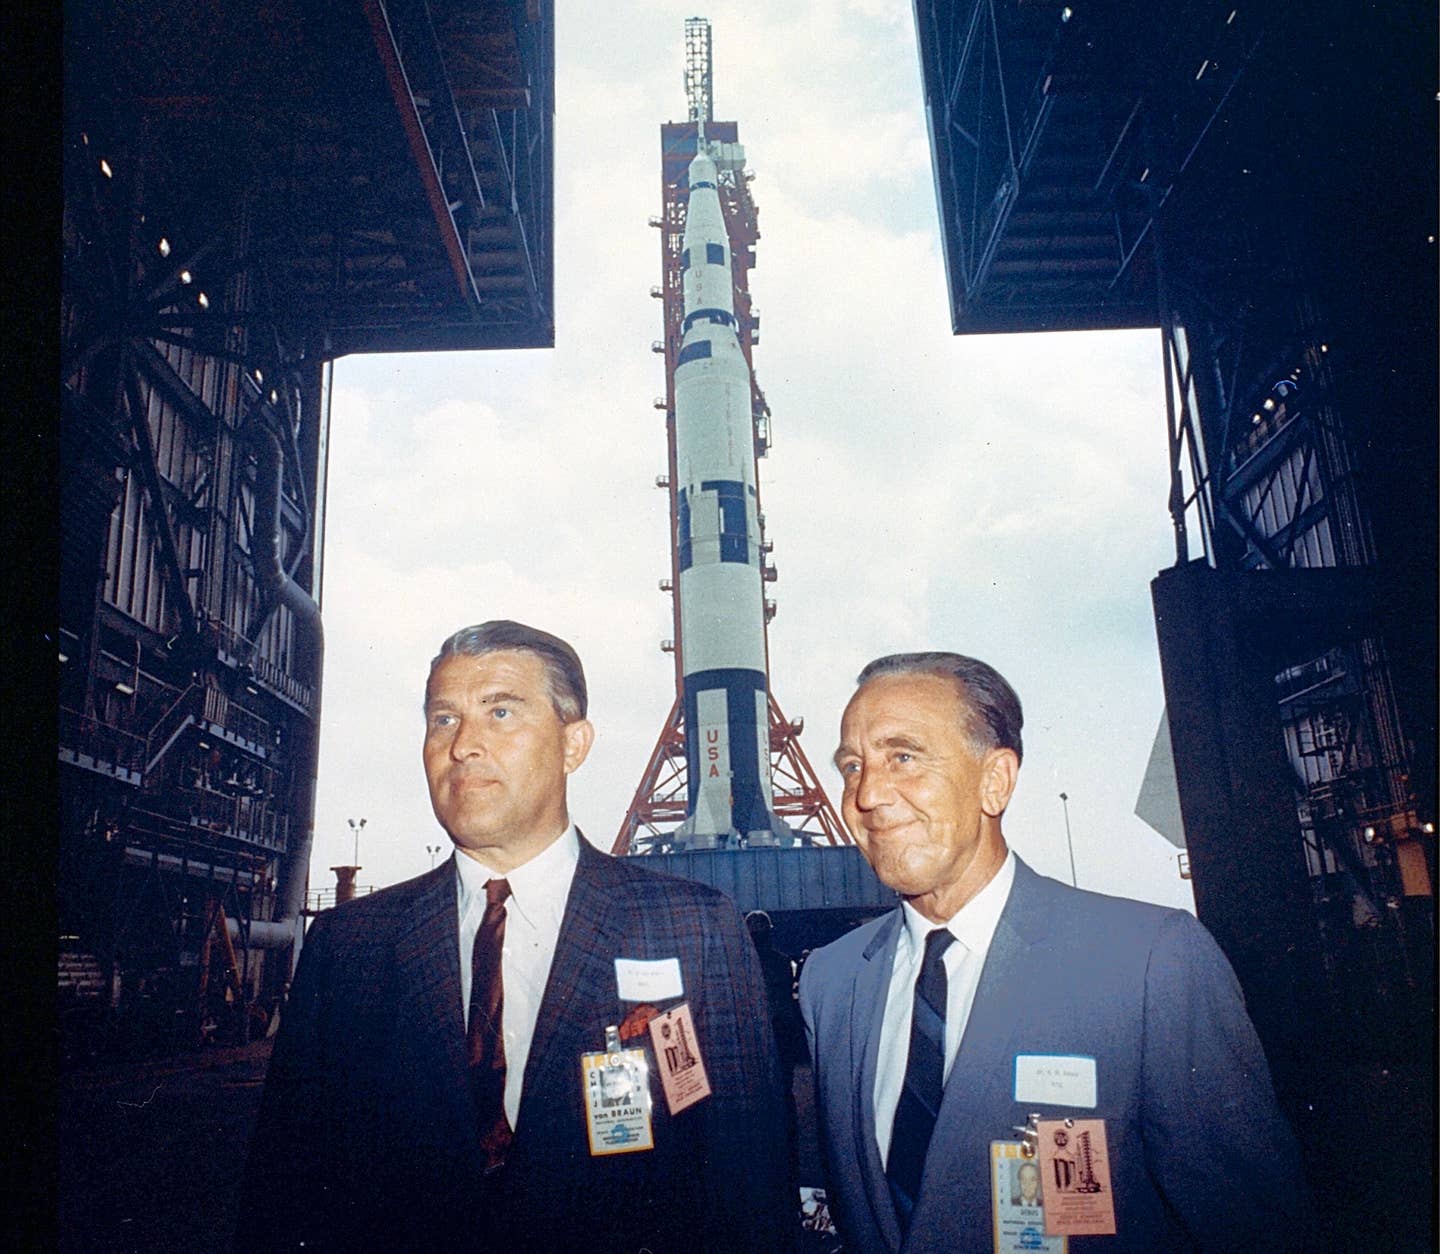 Wernher von Braun (left) and Kurt Debus at the Kennedy Space Center, May 26, 1966. <em>NASA/Wikimedia Commons</em>